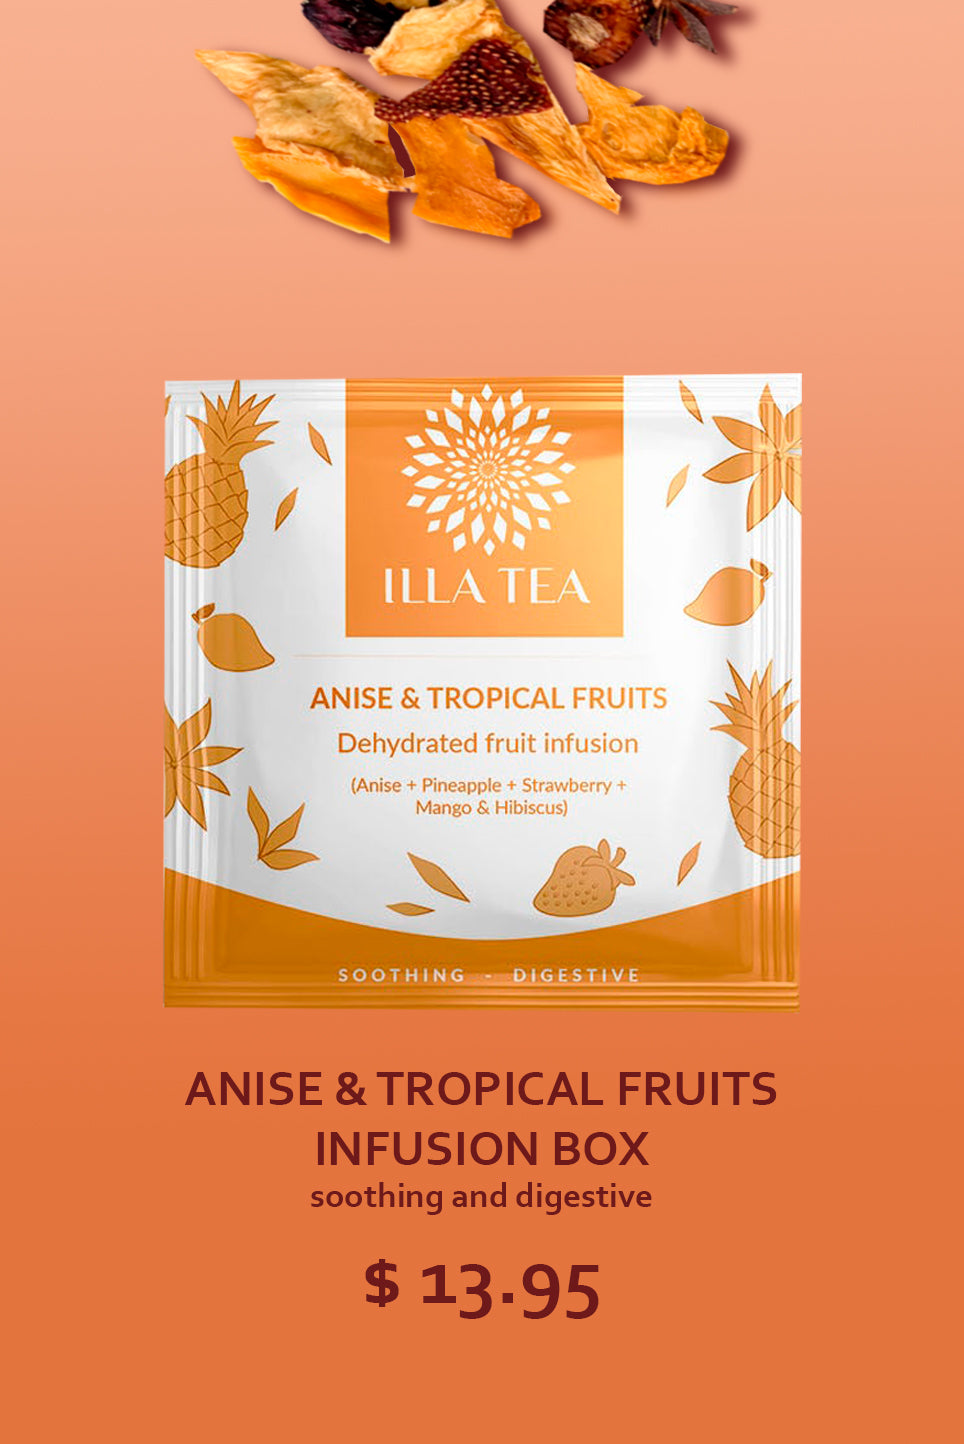 Anise & Tropical Fruits Infusion Box, soothing and digestive